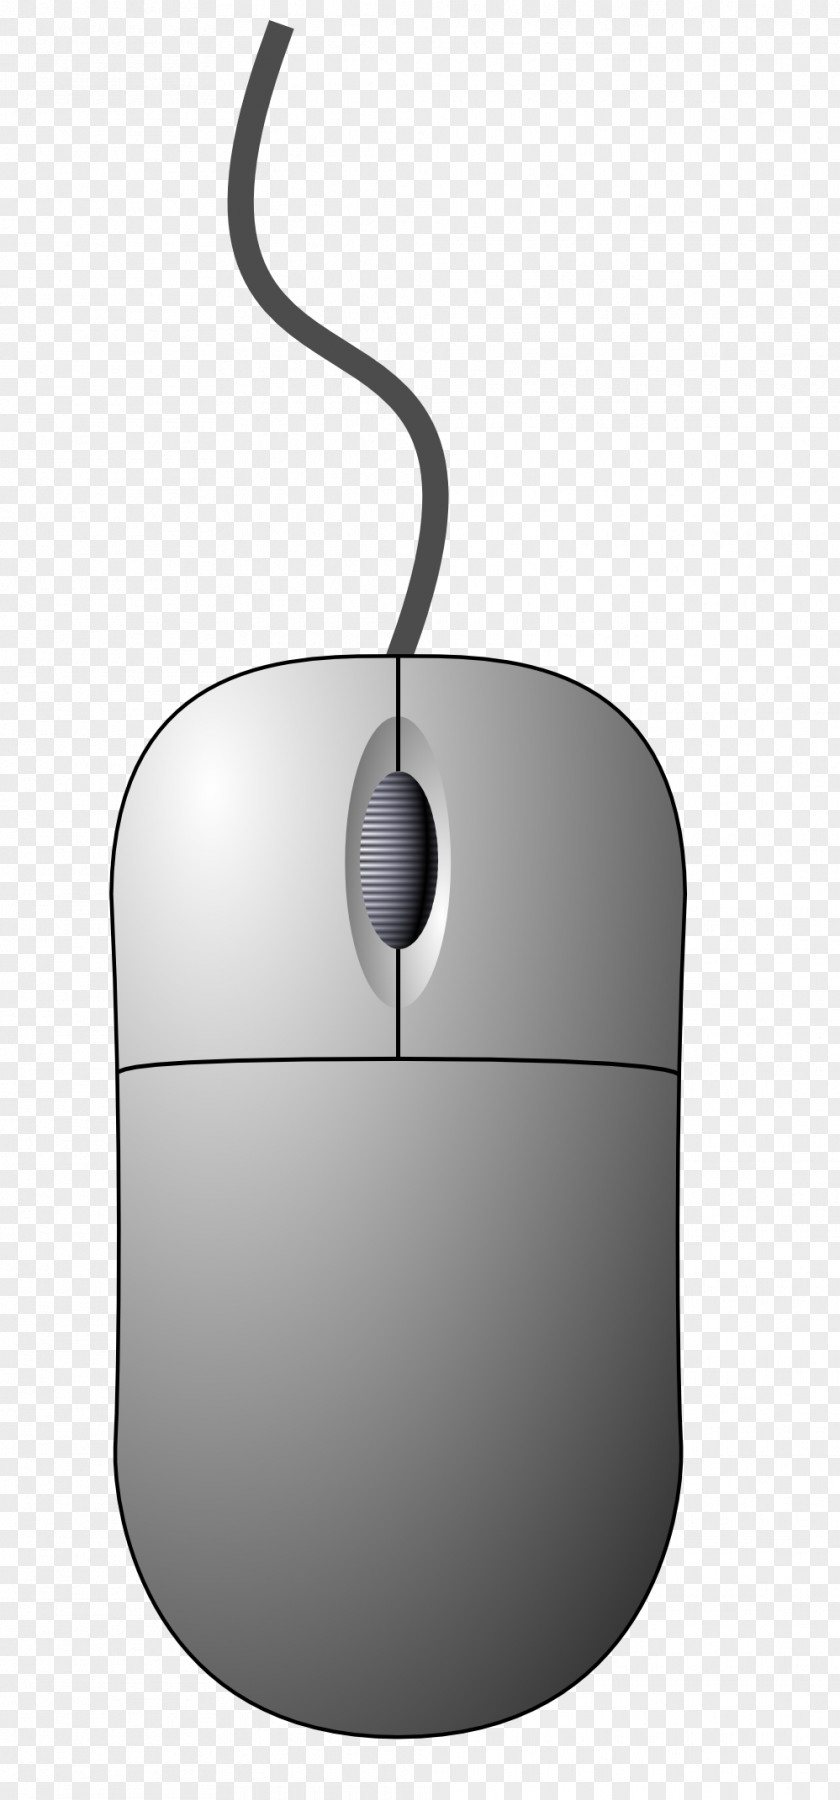 Pc Mouse Picture Computer Keyboard Optical Trackball PNG